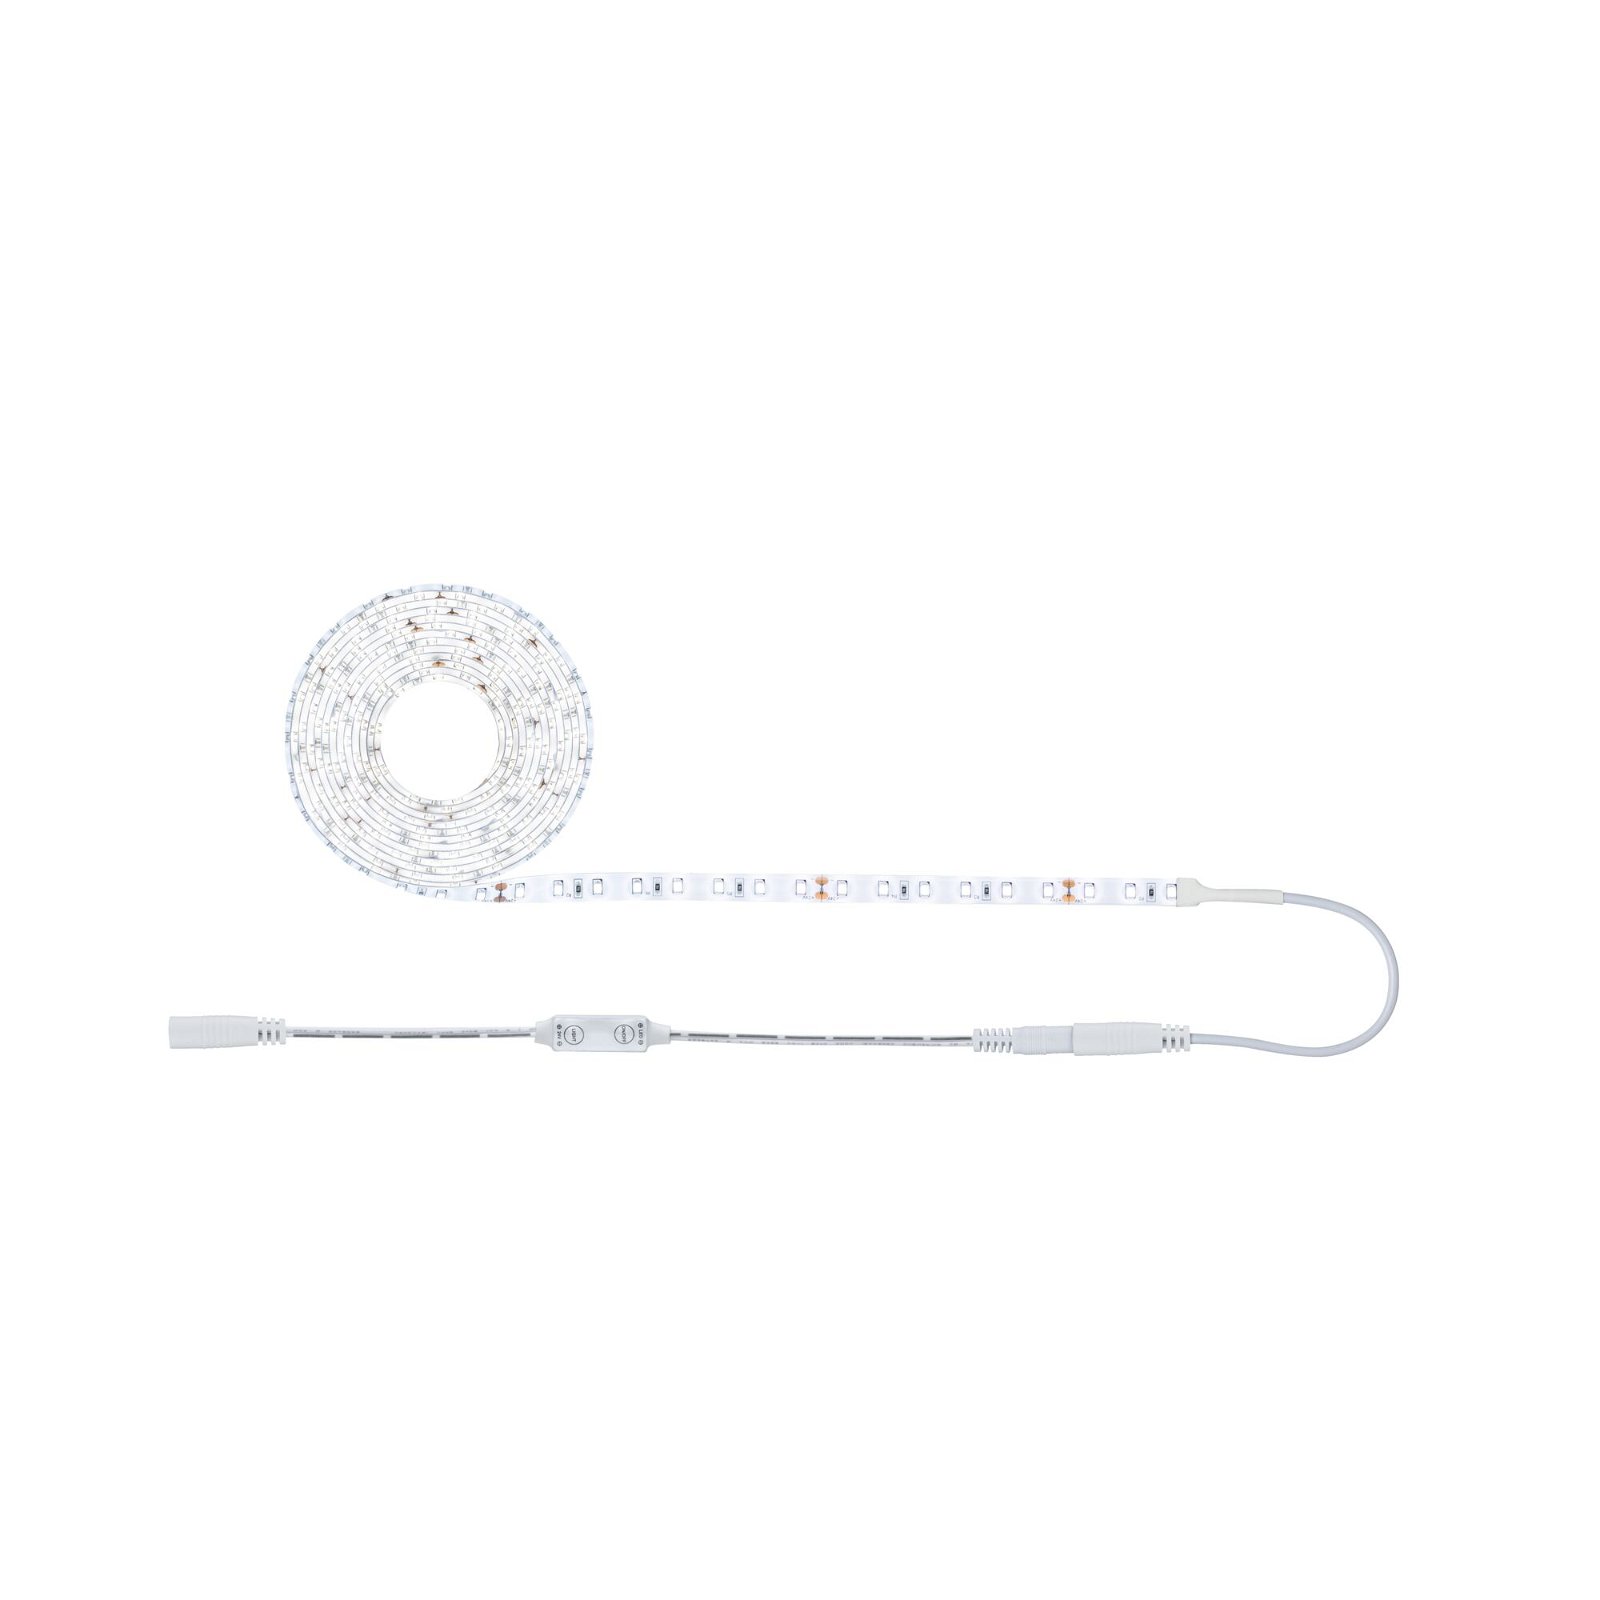 SimpLED Power LED Strip Neutral white incl. Dimm/Switch Complete set 3m protect cover 33W 1060lm/m 4000K 48VA